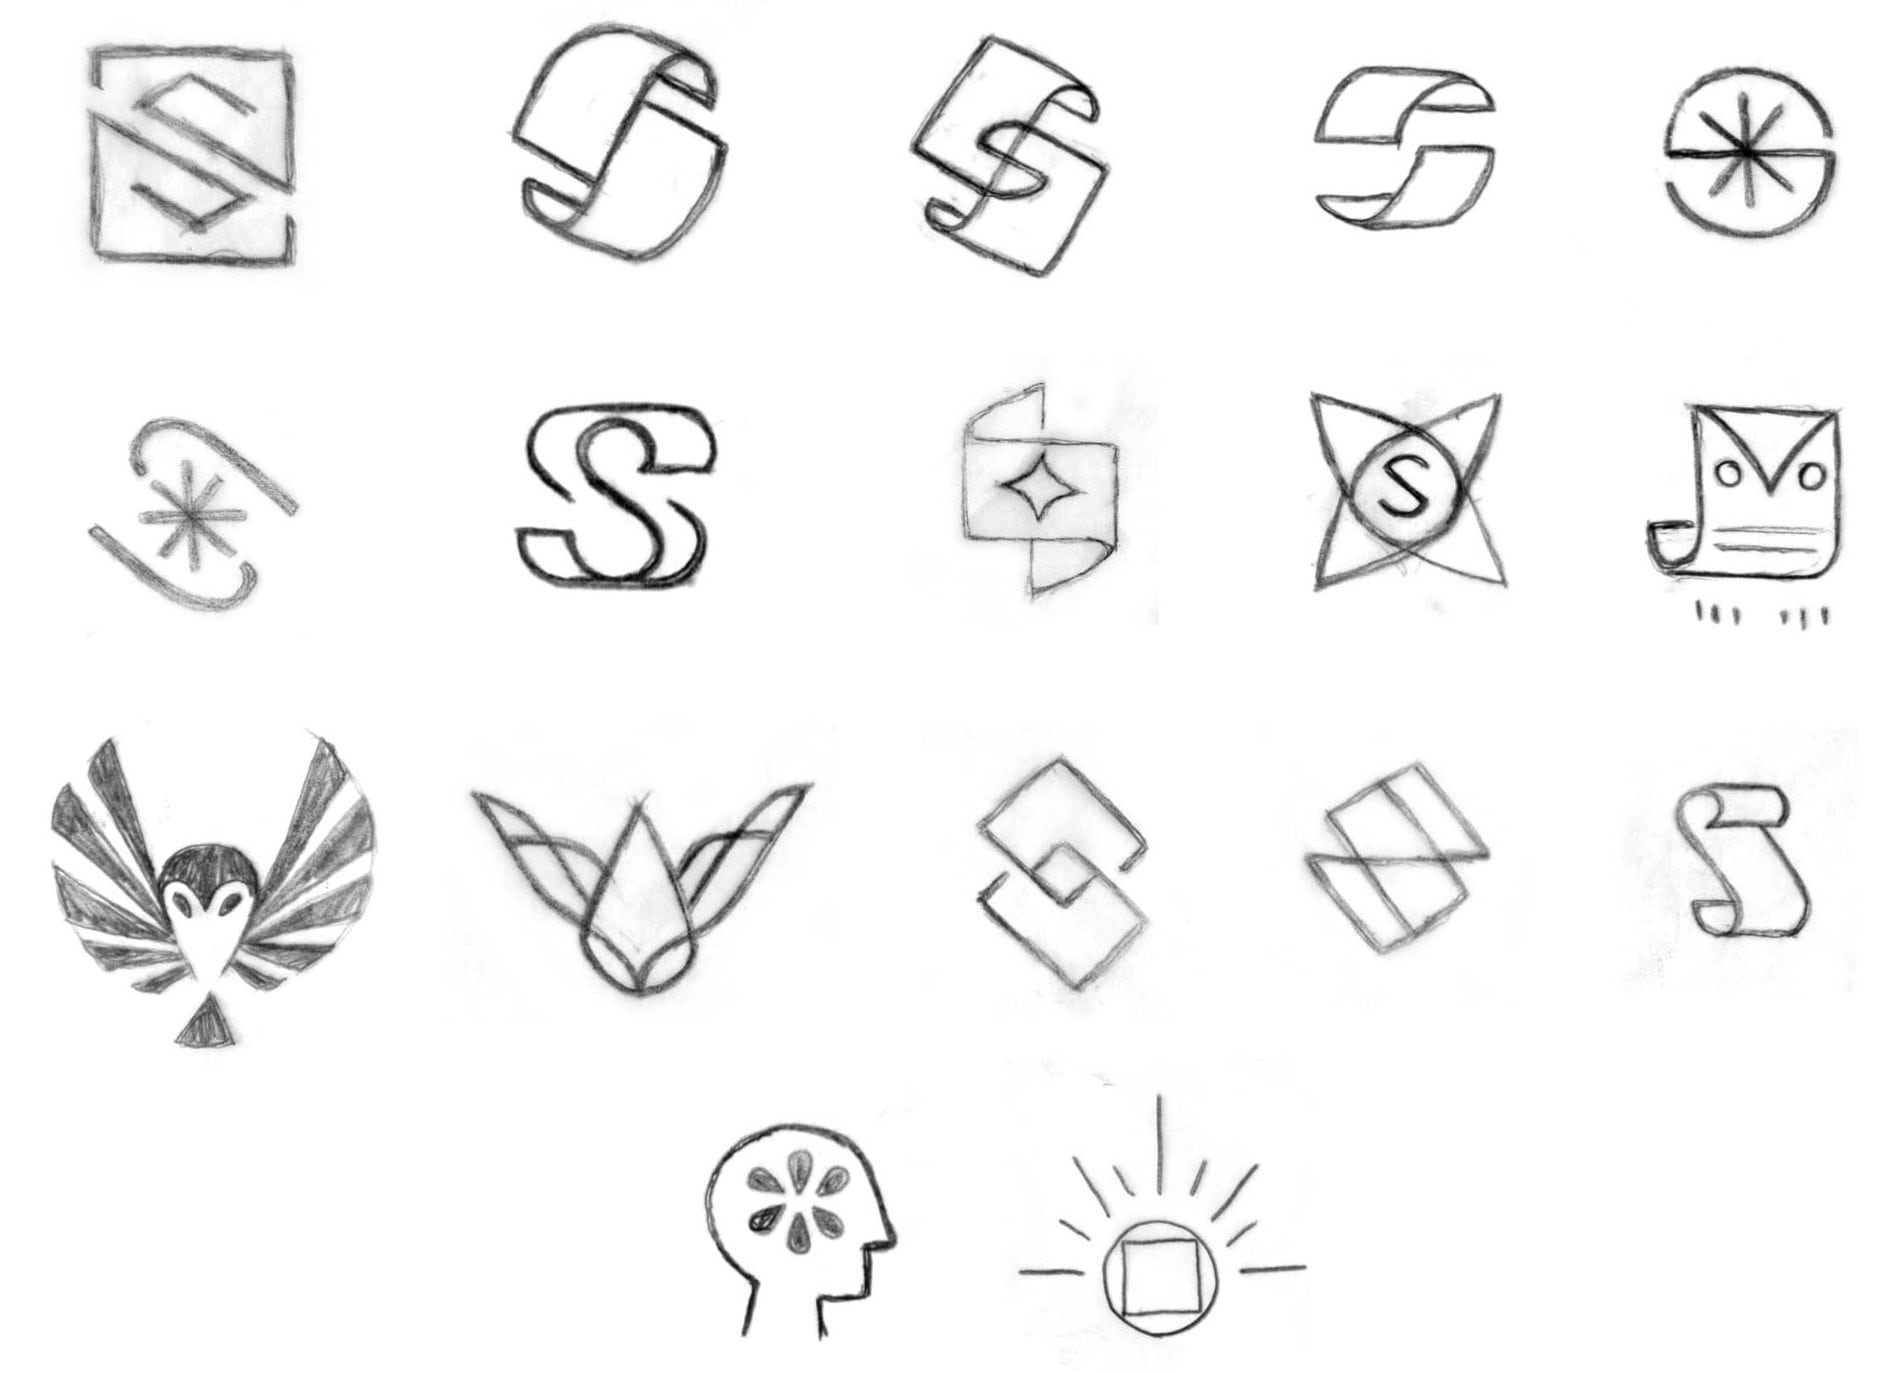 An array of sketched logo ideas for Smartpress lined up in four rows.